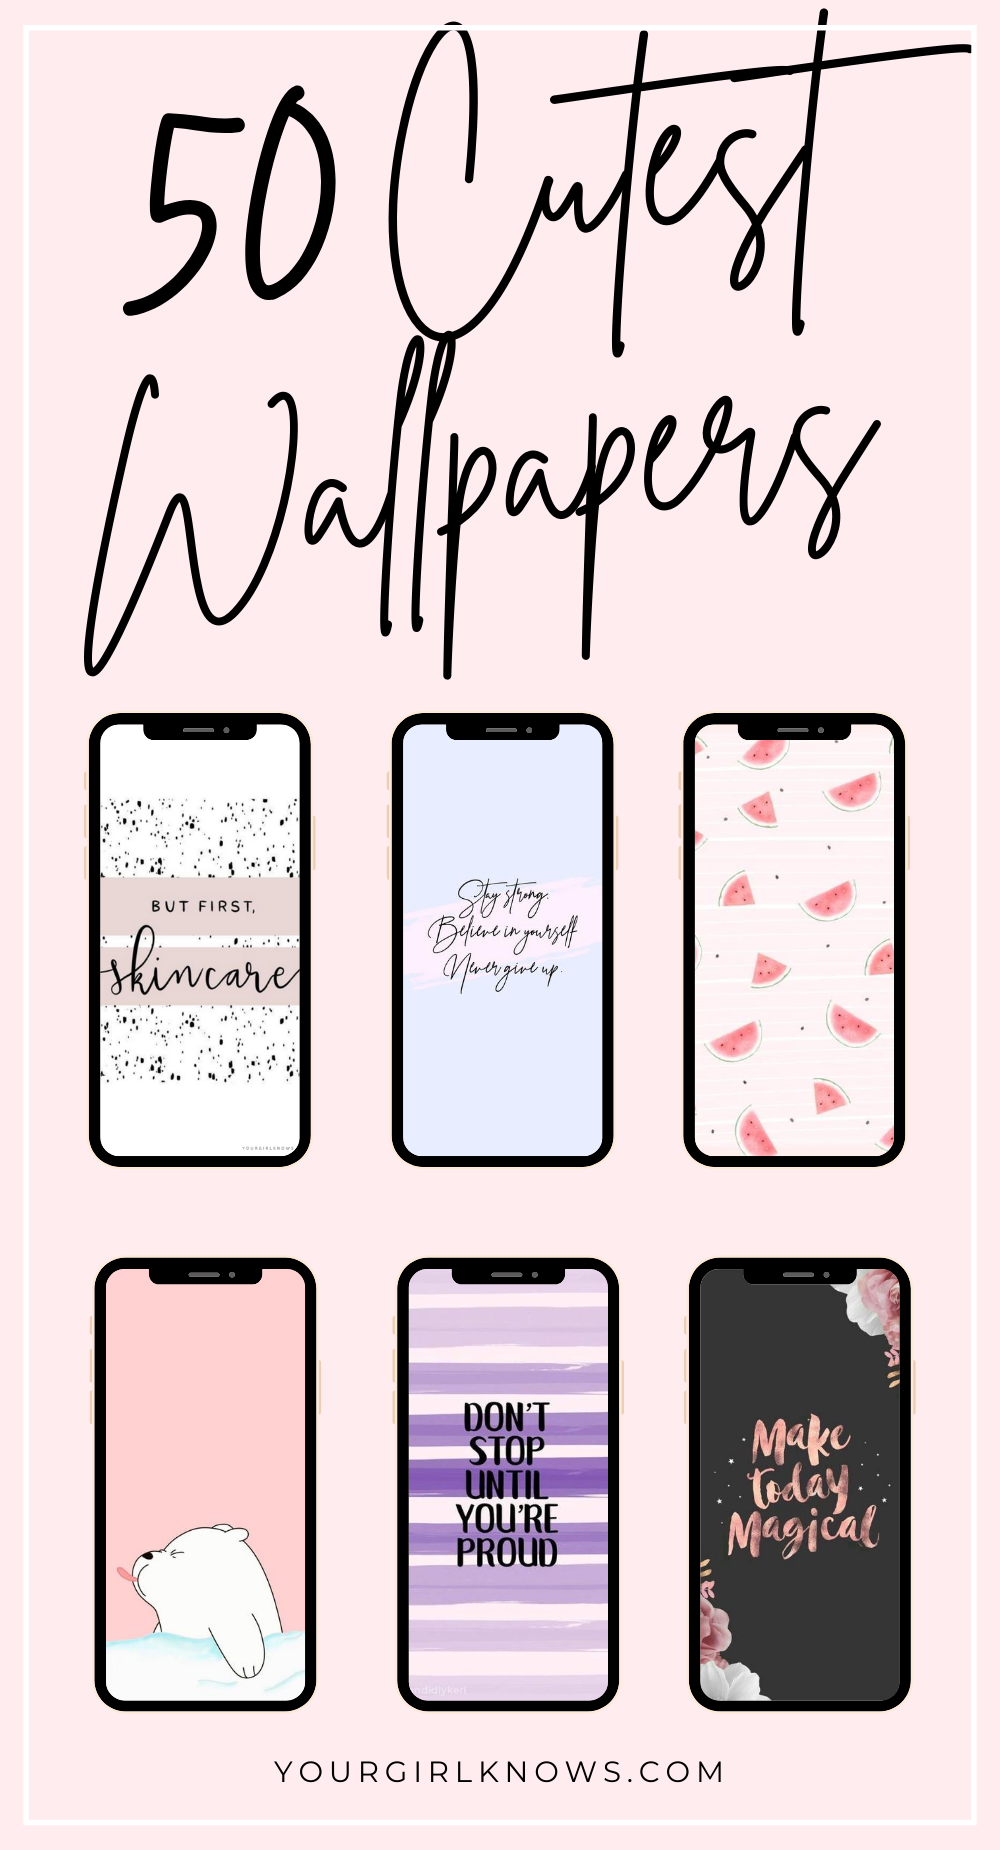 Download Free 100 + popular cute wallpapers for girls